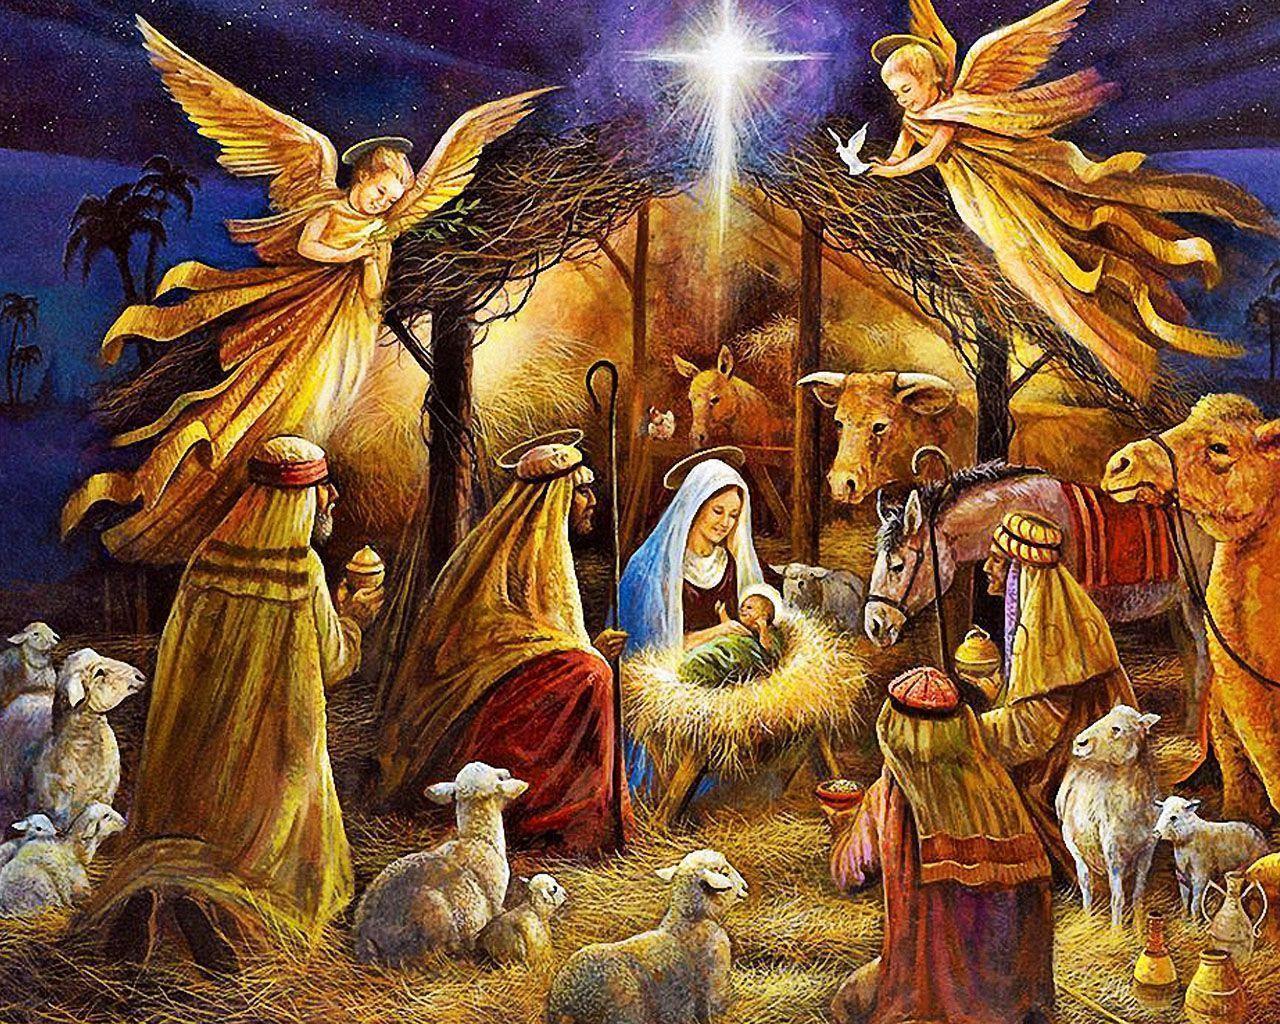 Download Celebrate the Birth of Jesus with a Joyful Christmas Wallpaper |  Wallpapers.com